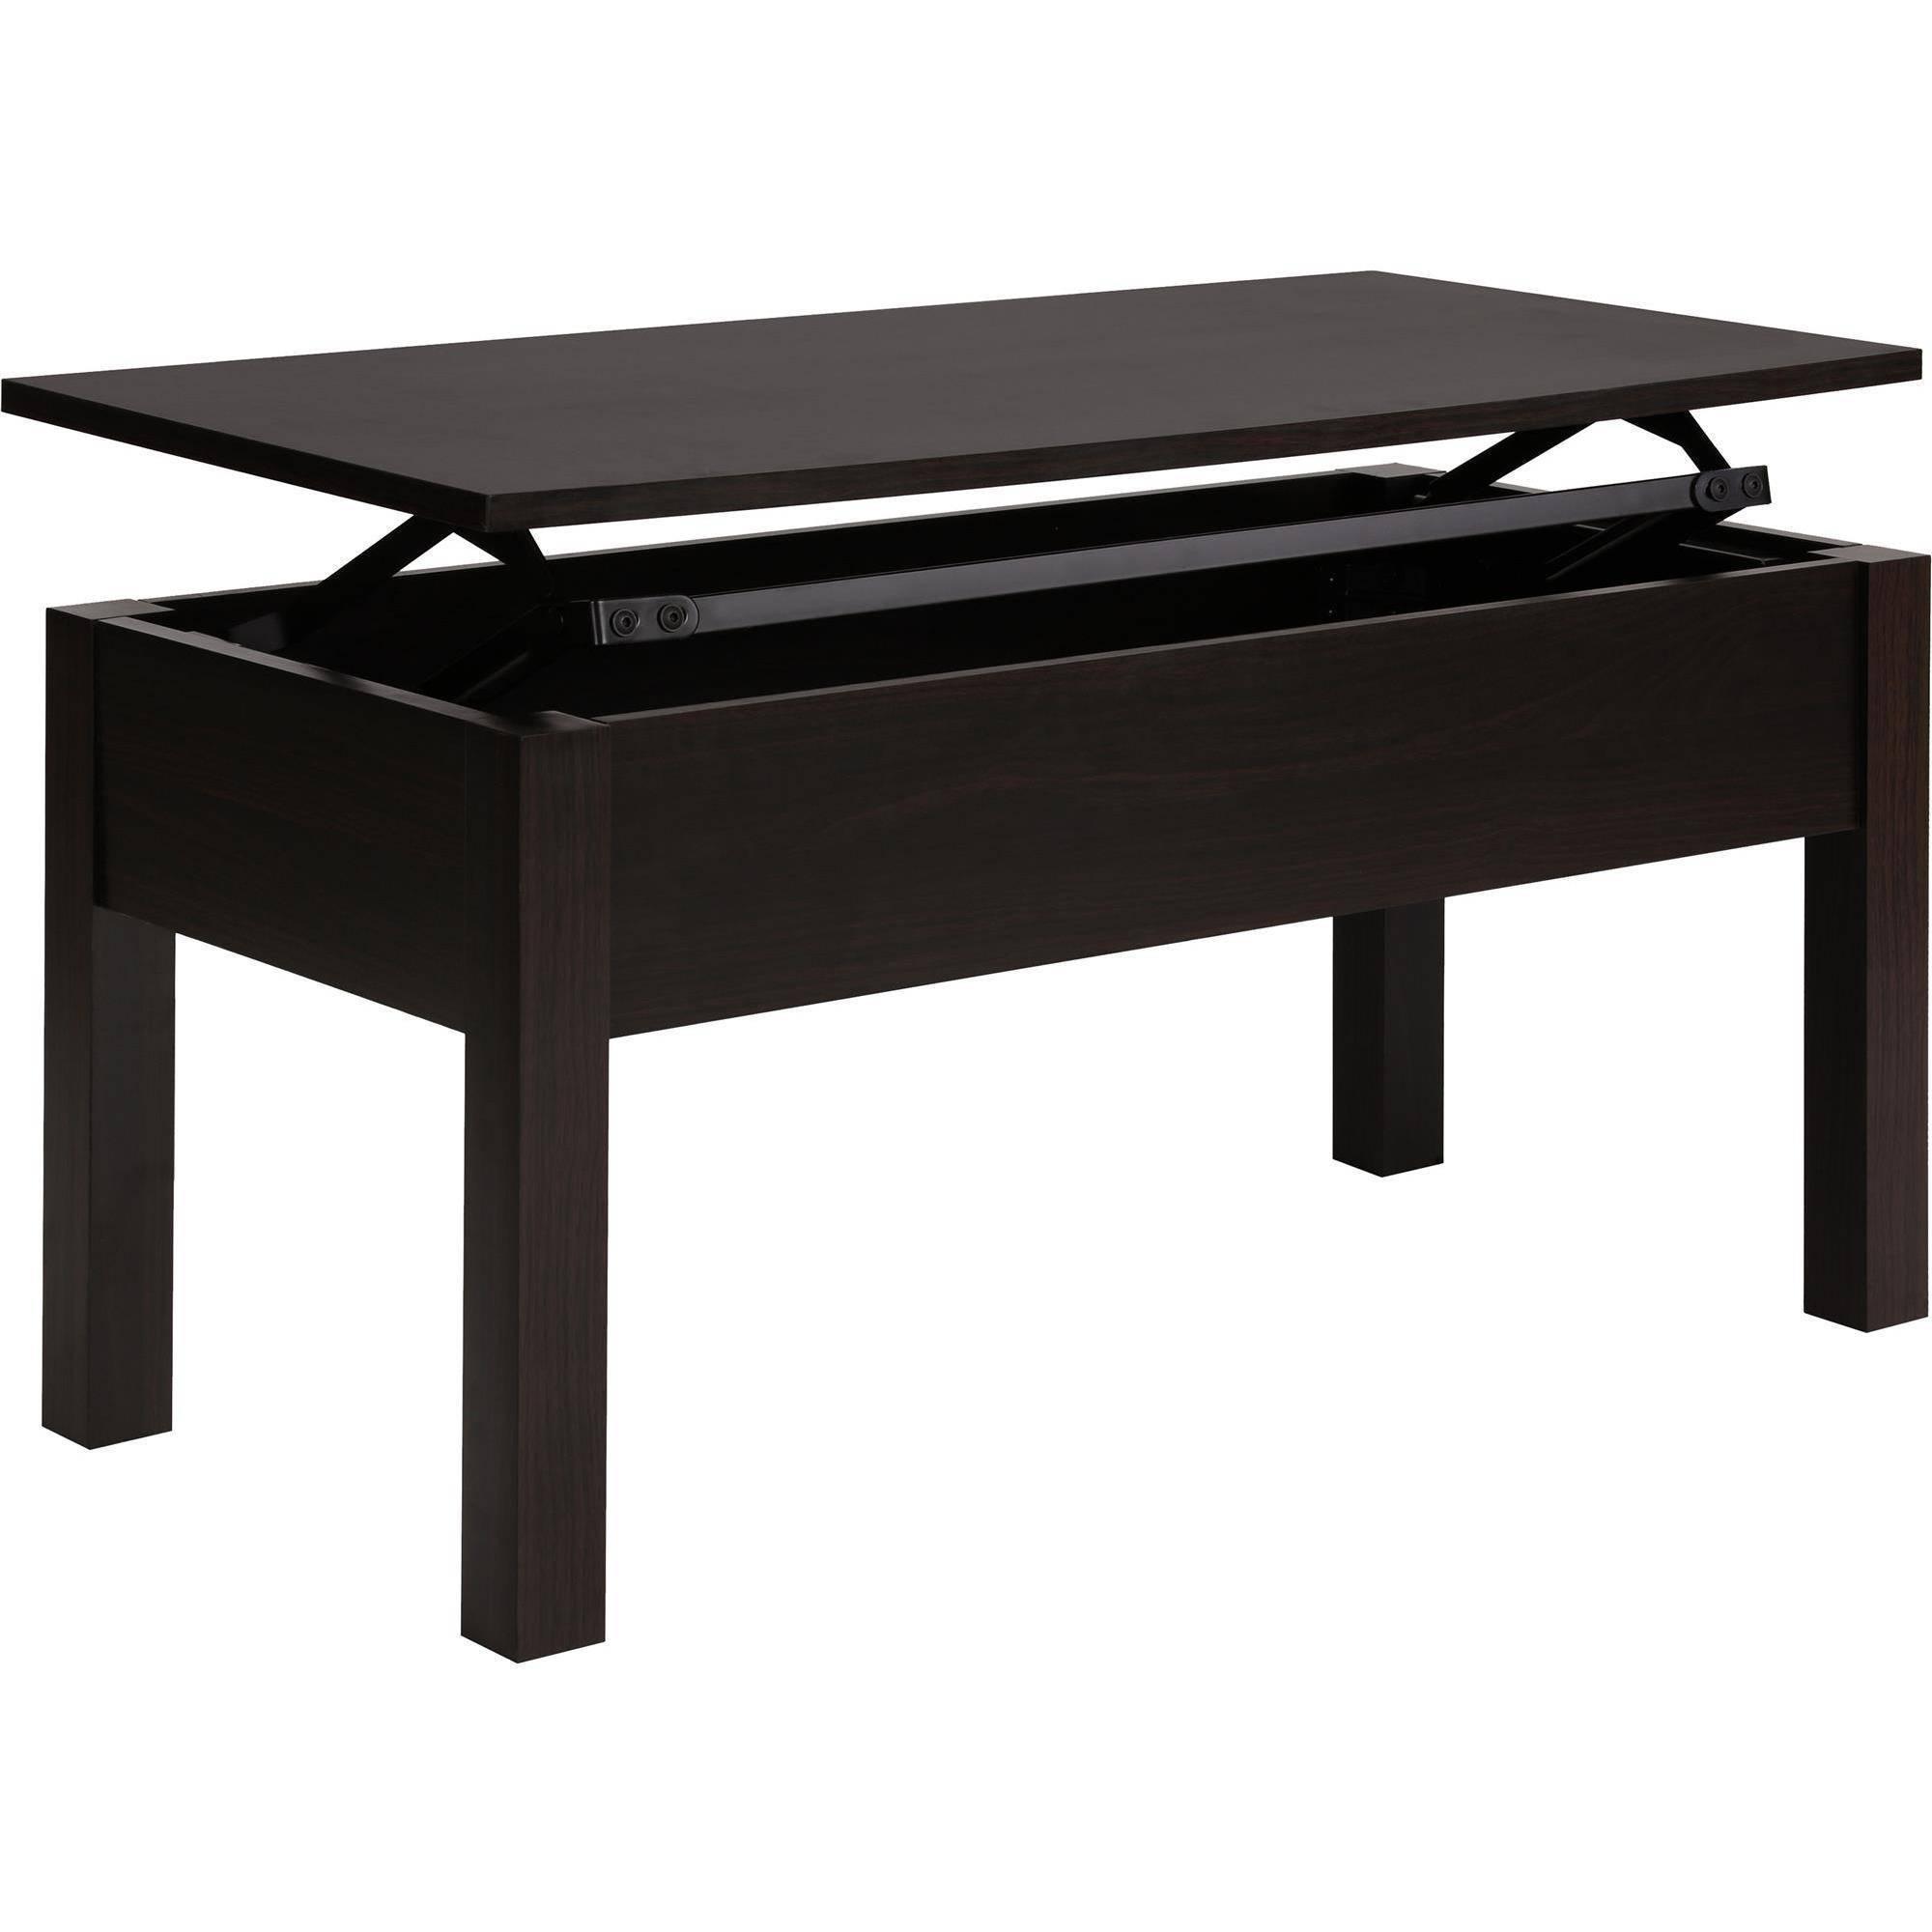 Mainstays Lift-Top Coffee Table for $89 Shipped